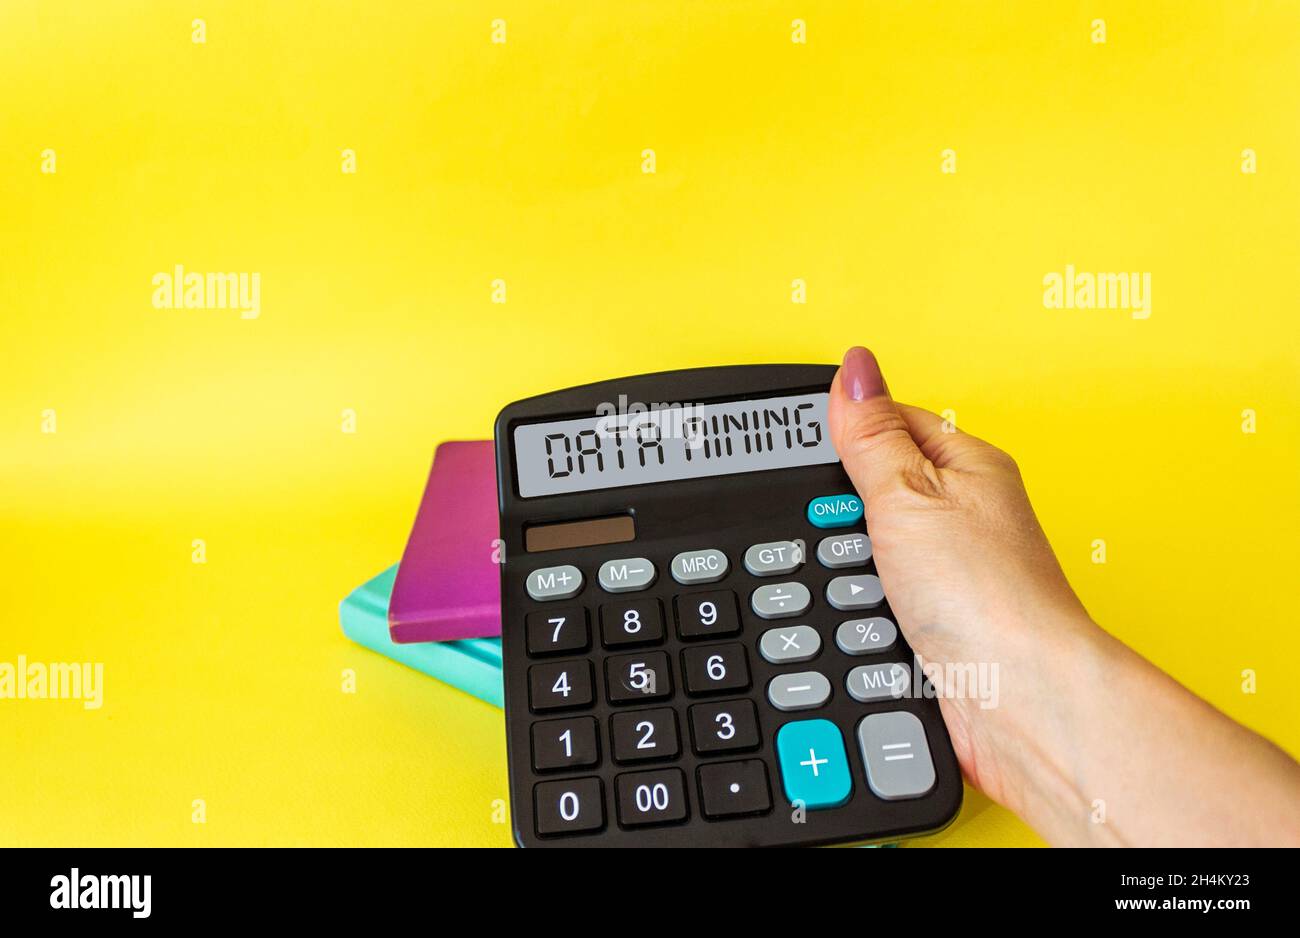 Data Mining is a text label on the display of a successful business research calculator. Stock Photo